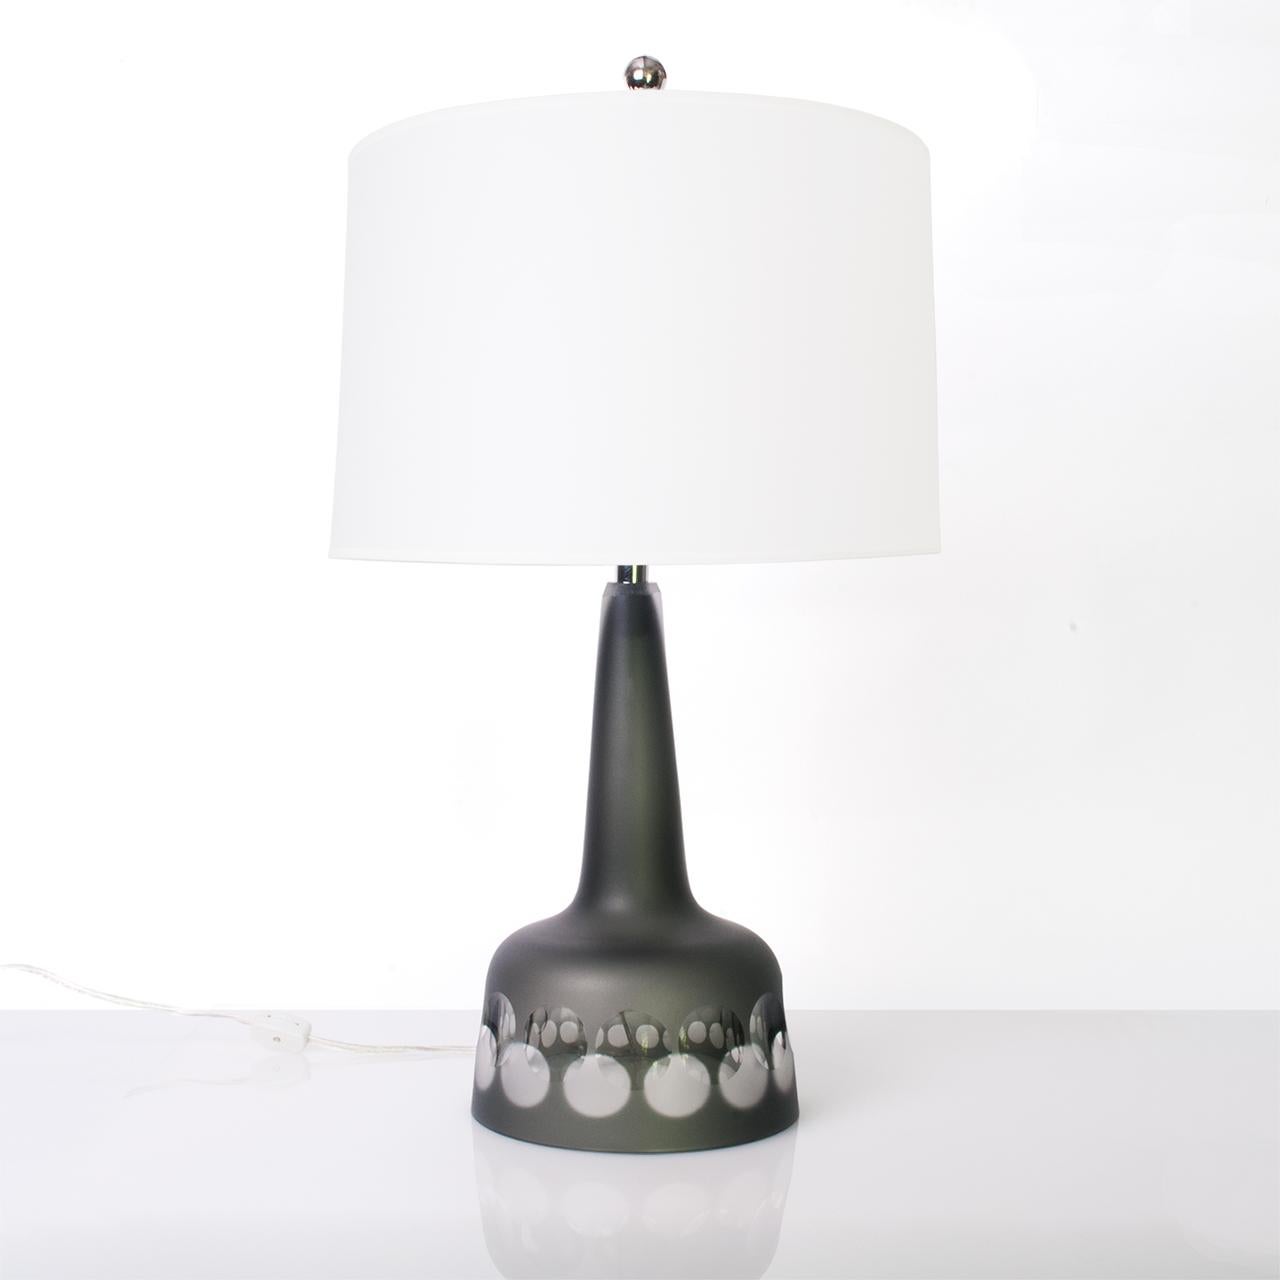 A Scandinavian Modern, Swedish Midcentury glass table lamp from Kosta studio in a grayish green and clear glass with circle pattern. Newly rewired and fitted with new nickel plated socket and hardware. Measures: Total height 23.5